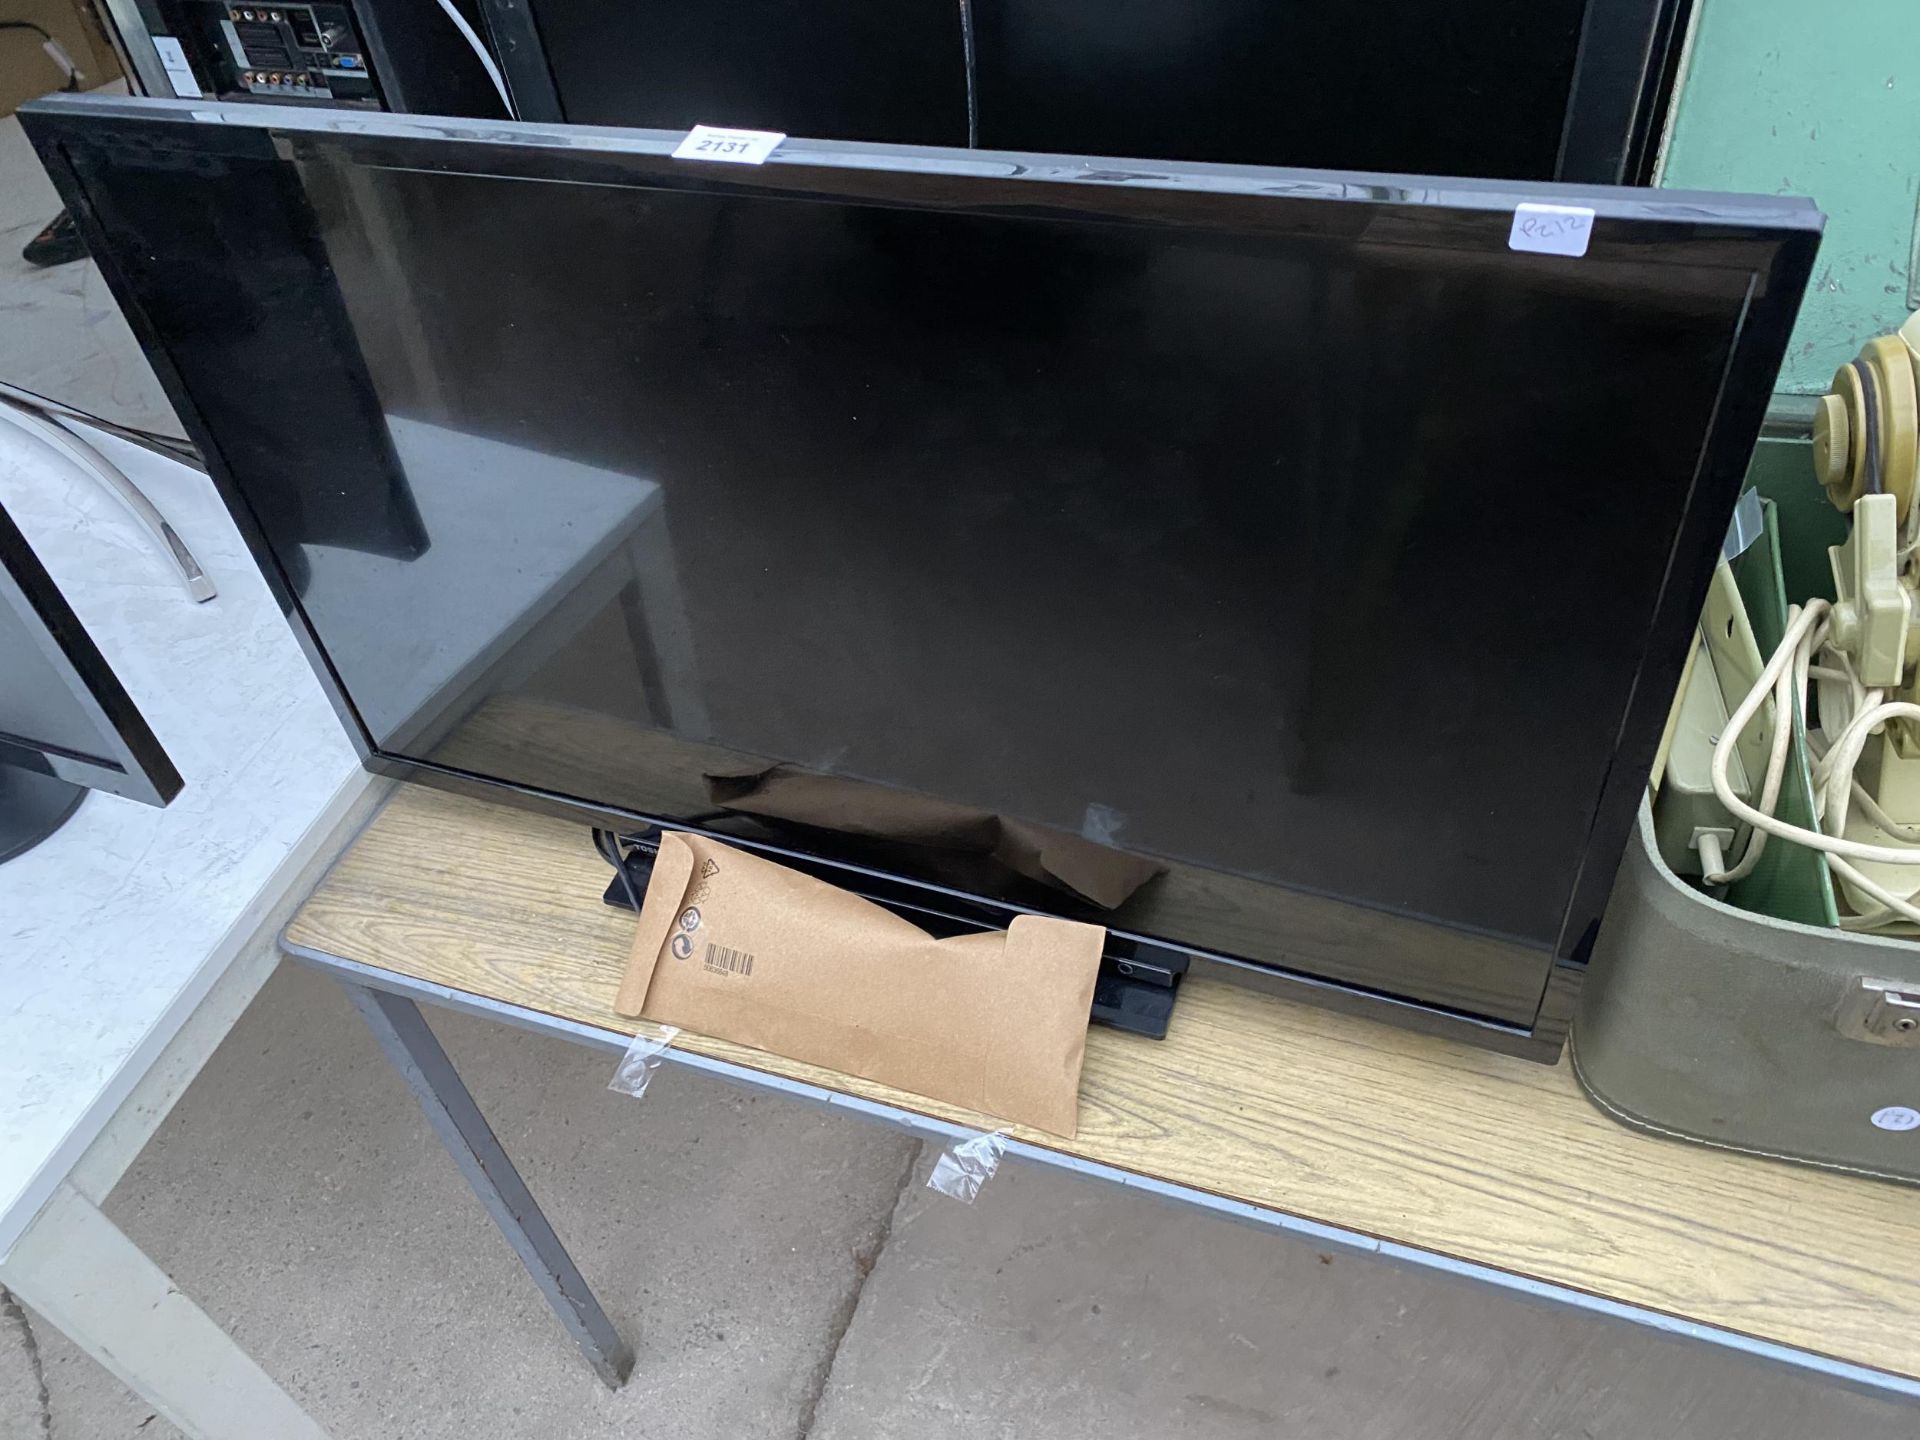 A TOSHIBA 32" TELEVISION WITH REMOTE CONTROL